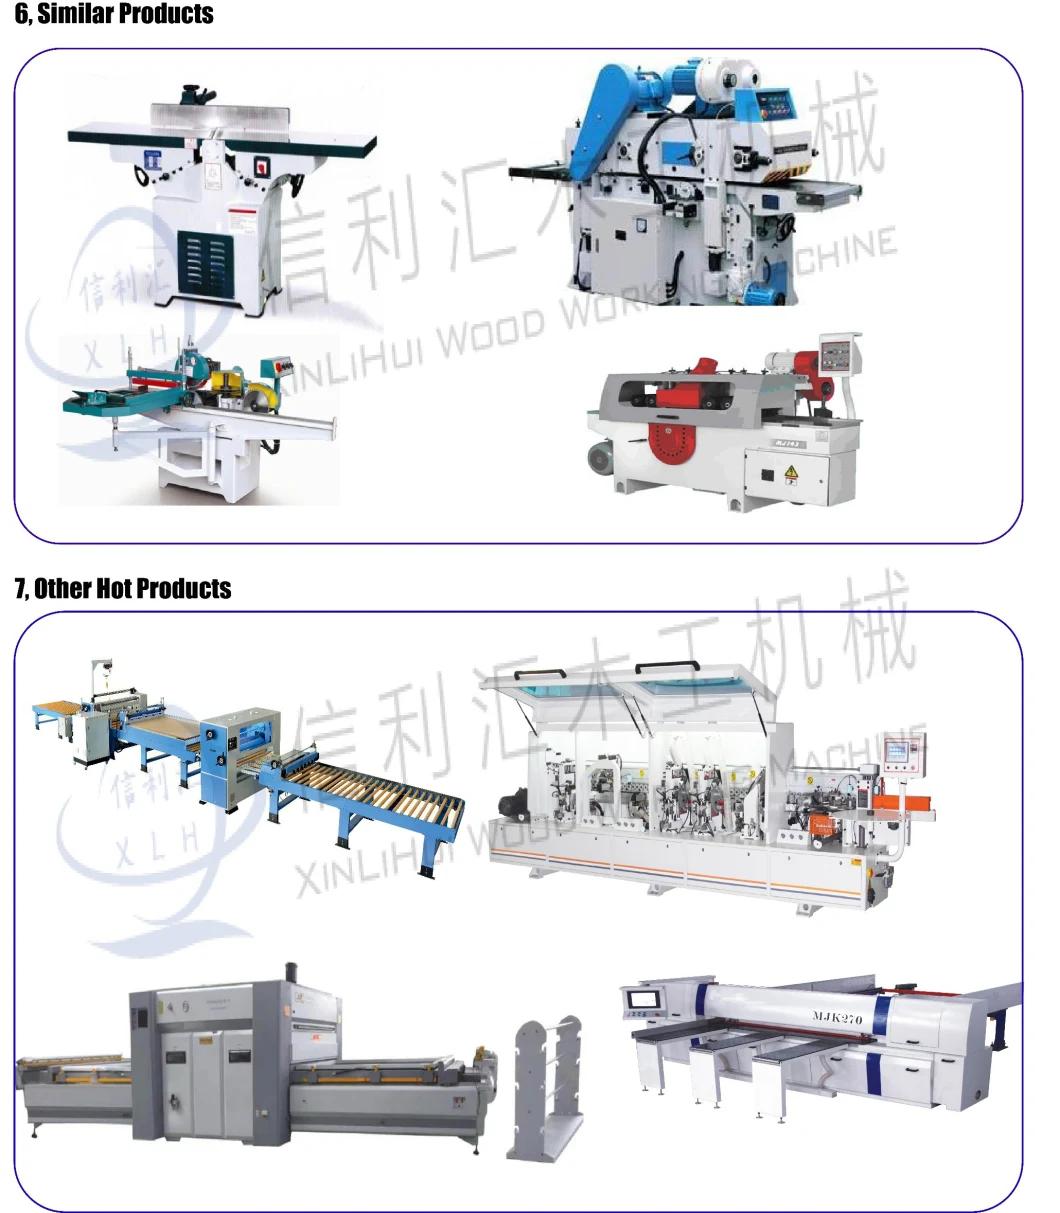 Upright Over Arm Pin Router Machine, Upright Router Machine, Mx5057 Router, Desltop CNC Router